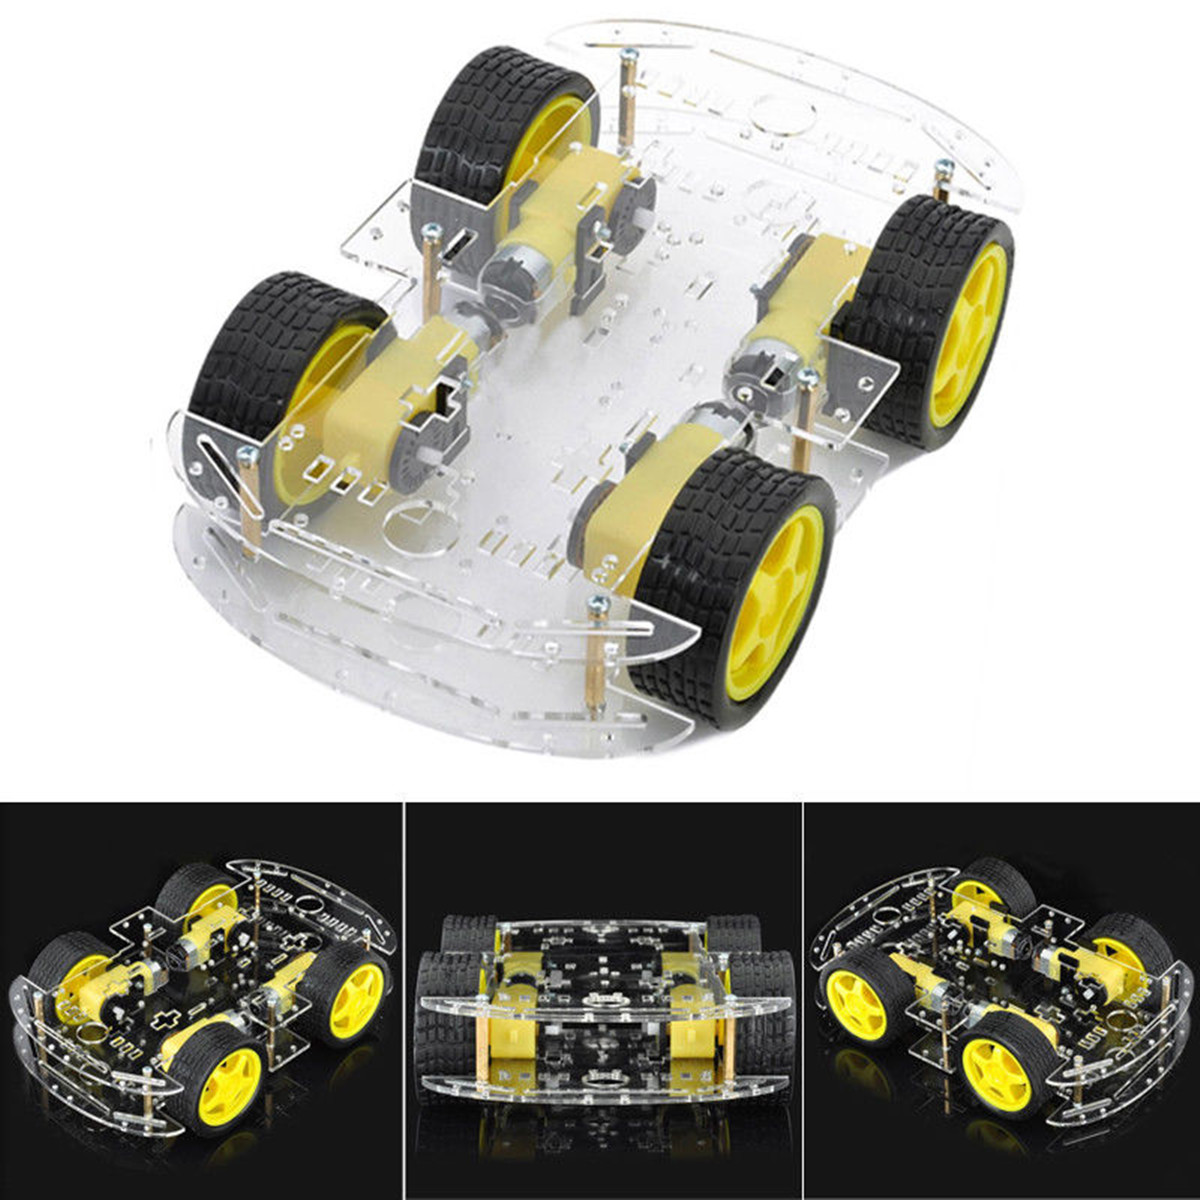 

3Pcs Geekcreit® 4WD Smart Robot Car Chassis Kits With Strong Magneto Speed Encoder For Arduino